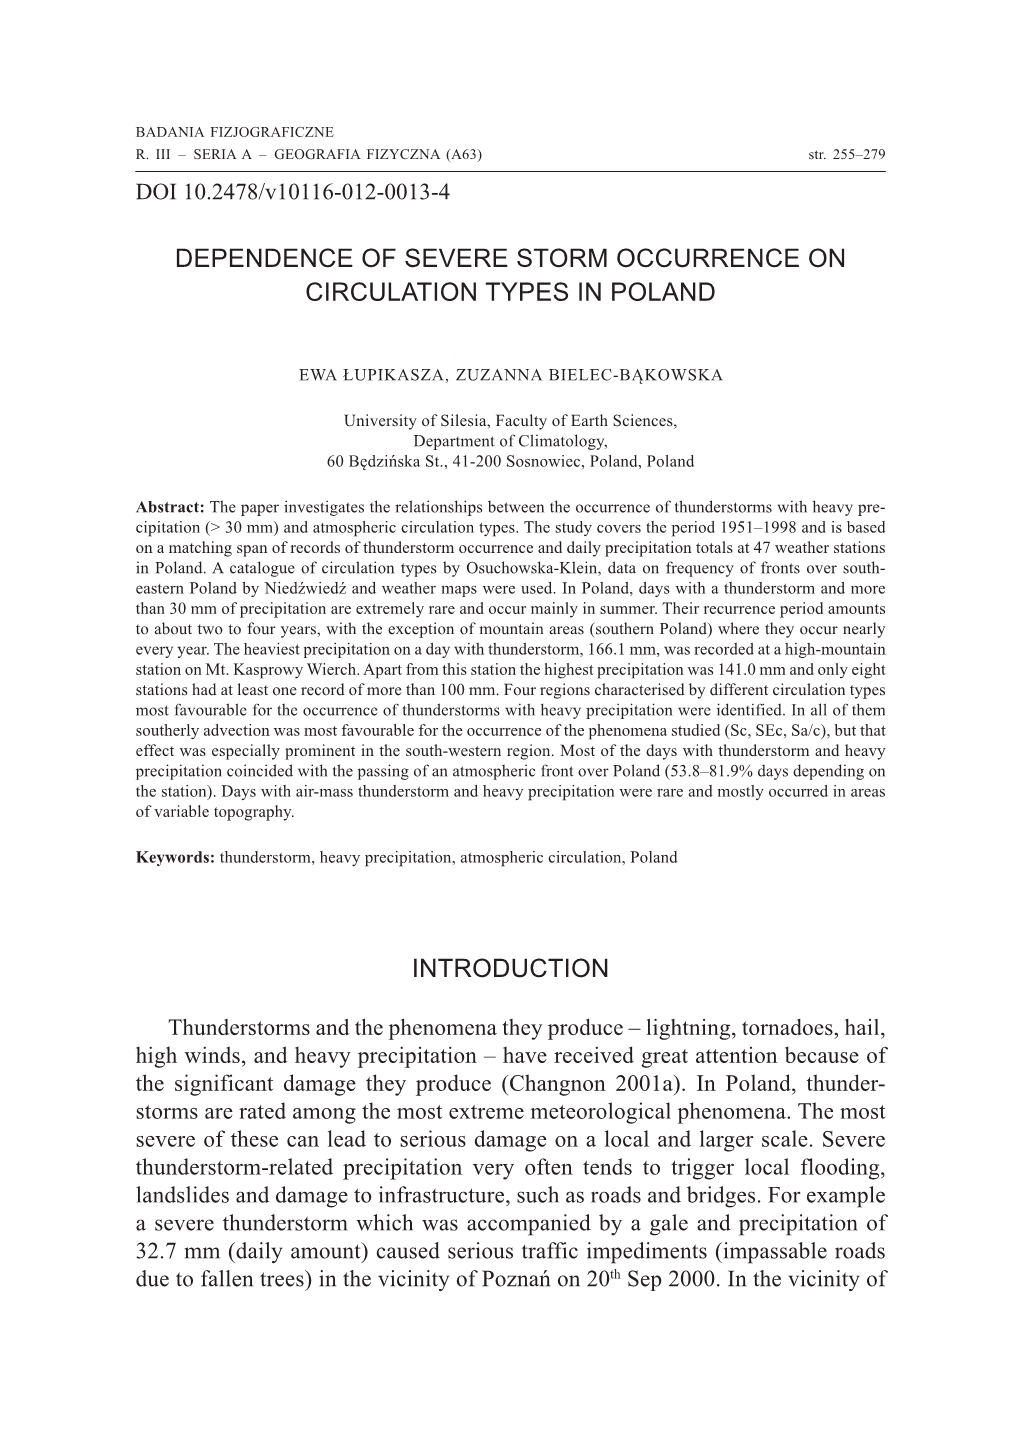 Dependence of Severe Storm Occurrence on Circulation Types in Poland